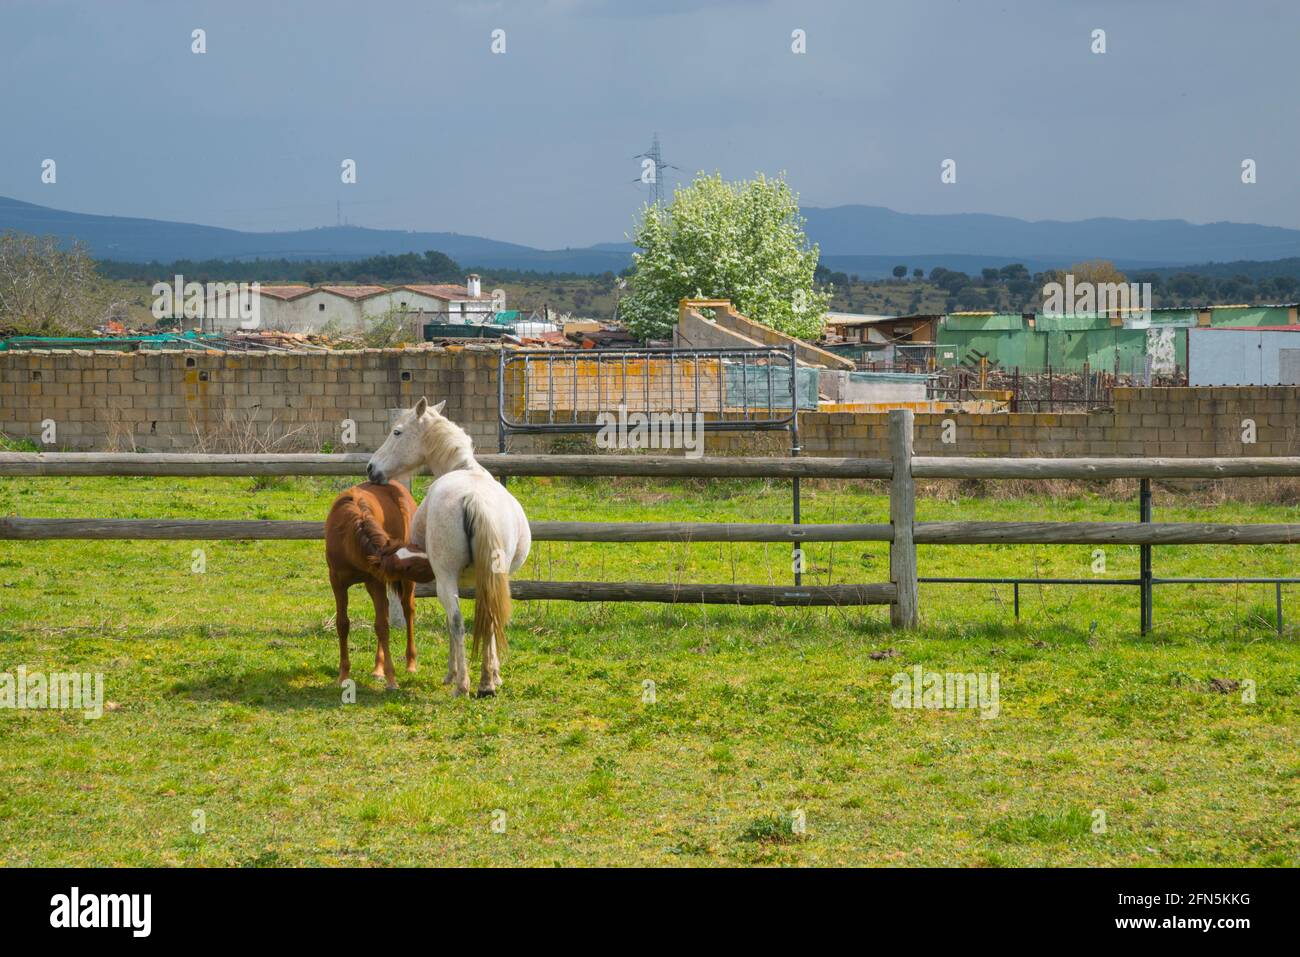 Two horses in a meadow. Gandullas, Madrid province, Spain. Stock Photo